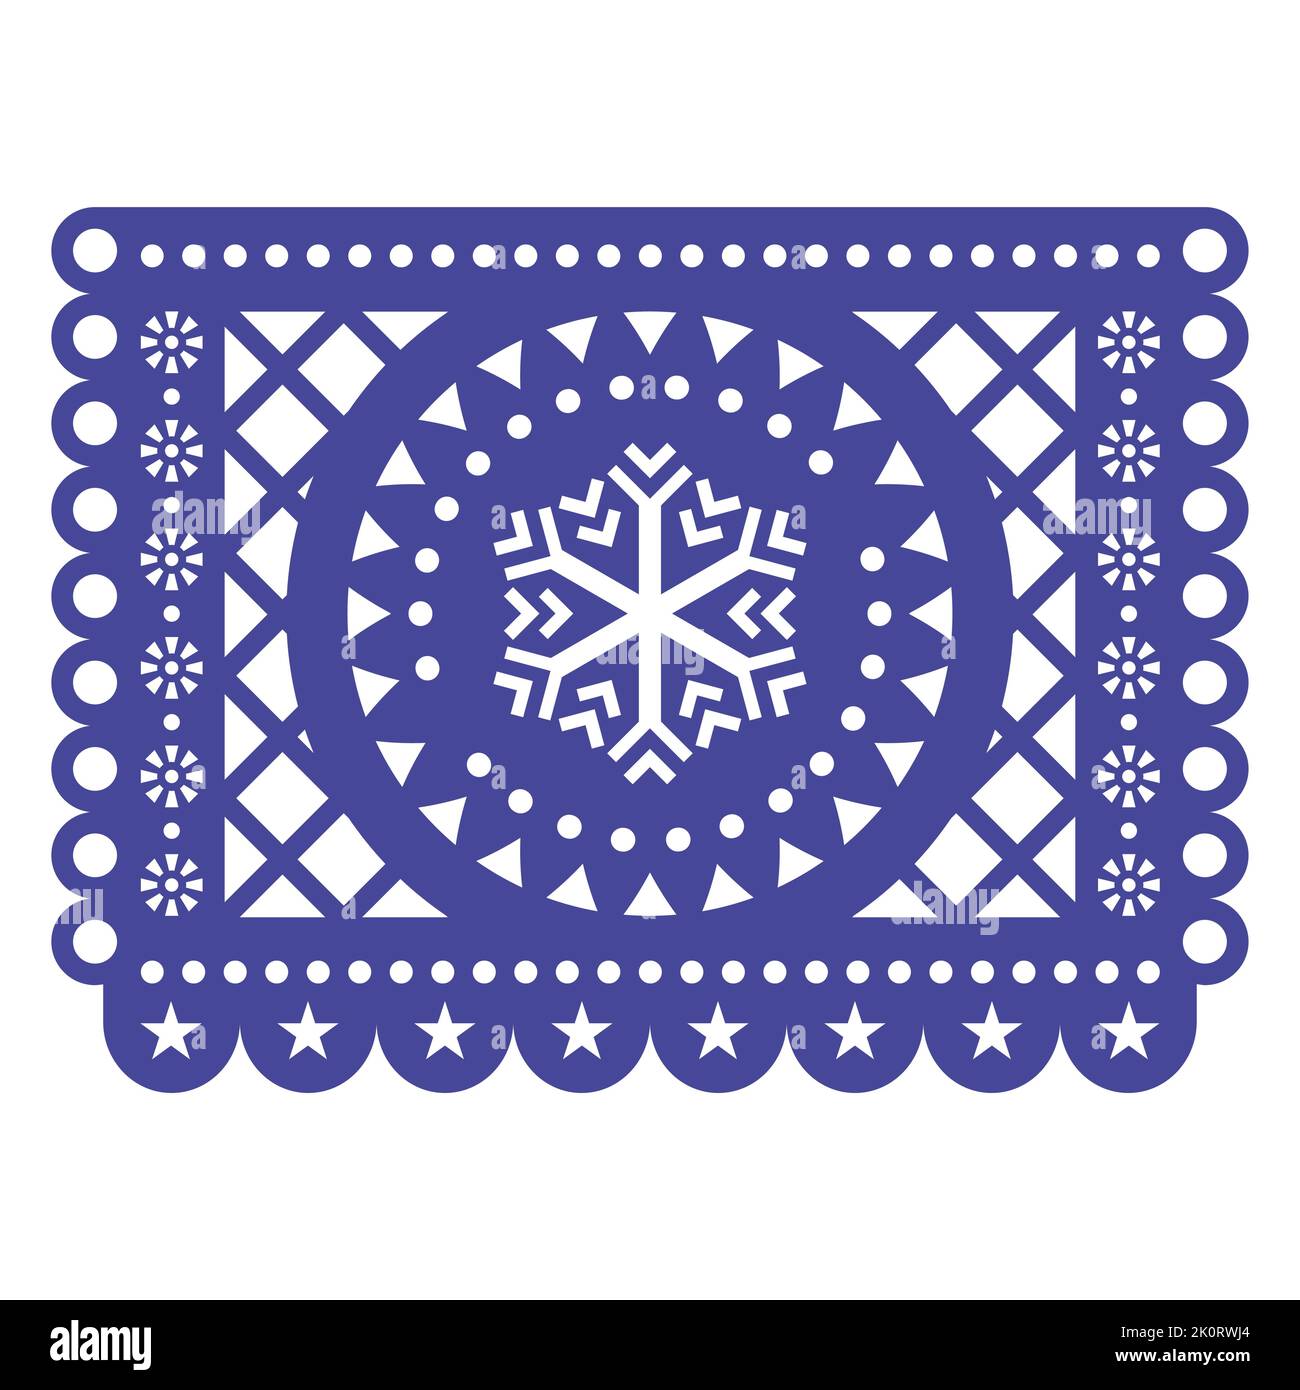 Papel Picado Christmas or winter vector design with snowflake and flowers, Mexican folk art decoration Stock Vector